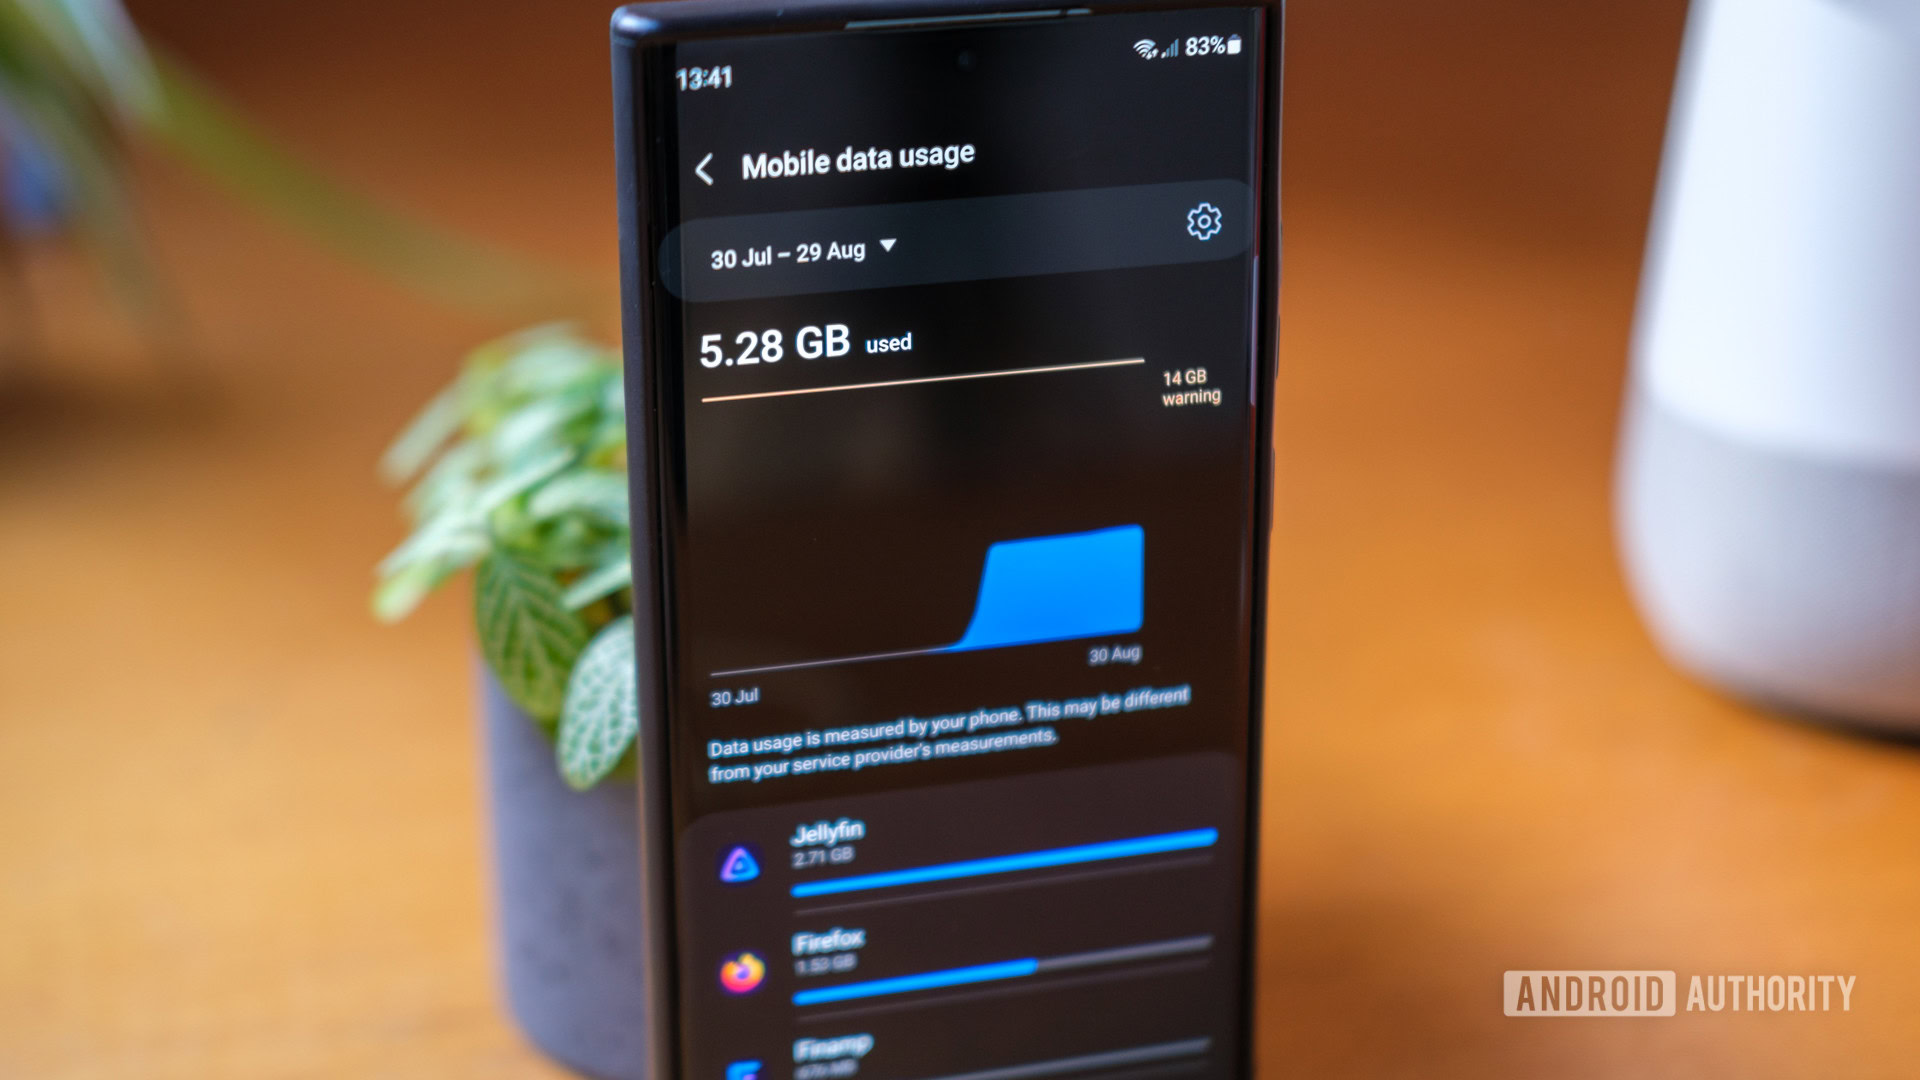 How to check data usage & data left on your Galaxy phone